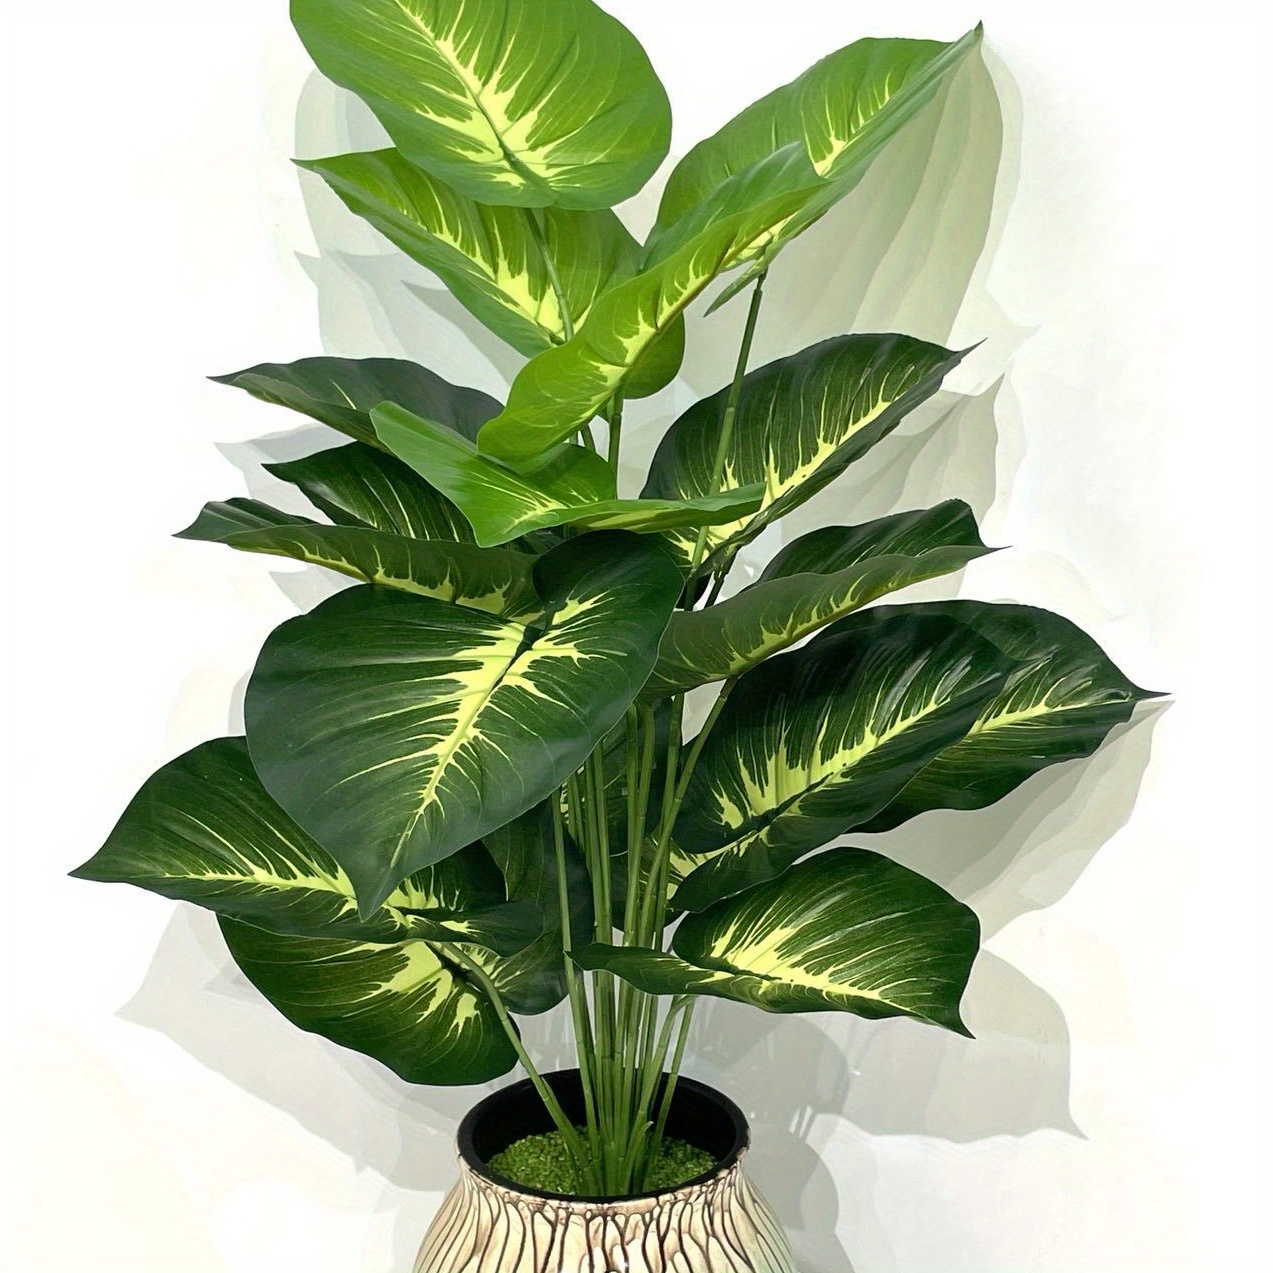 

Artificial Greenery Bonsai Plant, Plastic Faux Pothos Leaves, Home Decor Accent For Valentine's Day - 1pc Wedding Decoration Fake Potted Plant Centerpiece